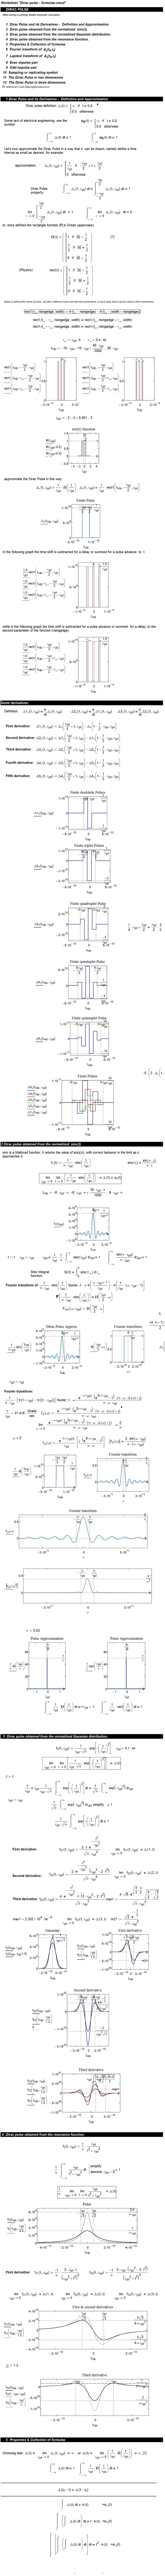 some Dirac pulse approximations.jpg